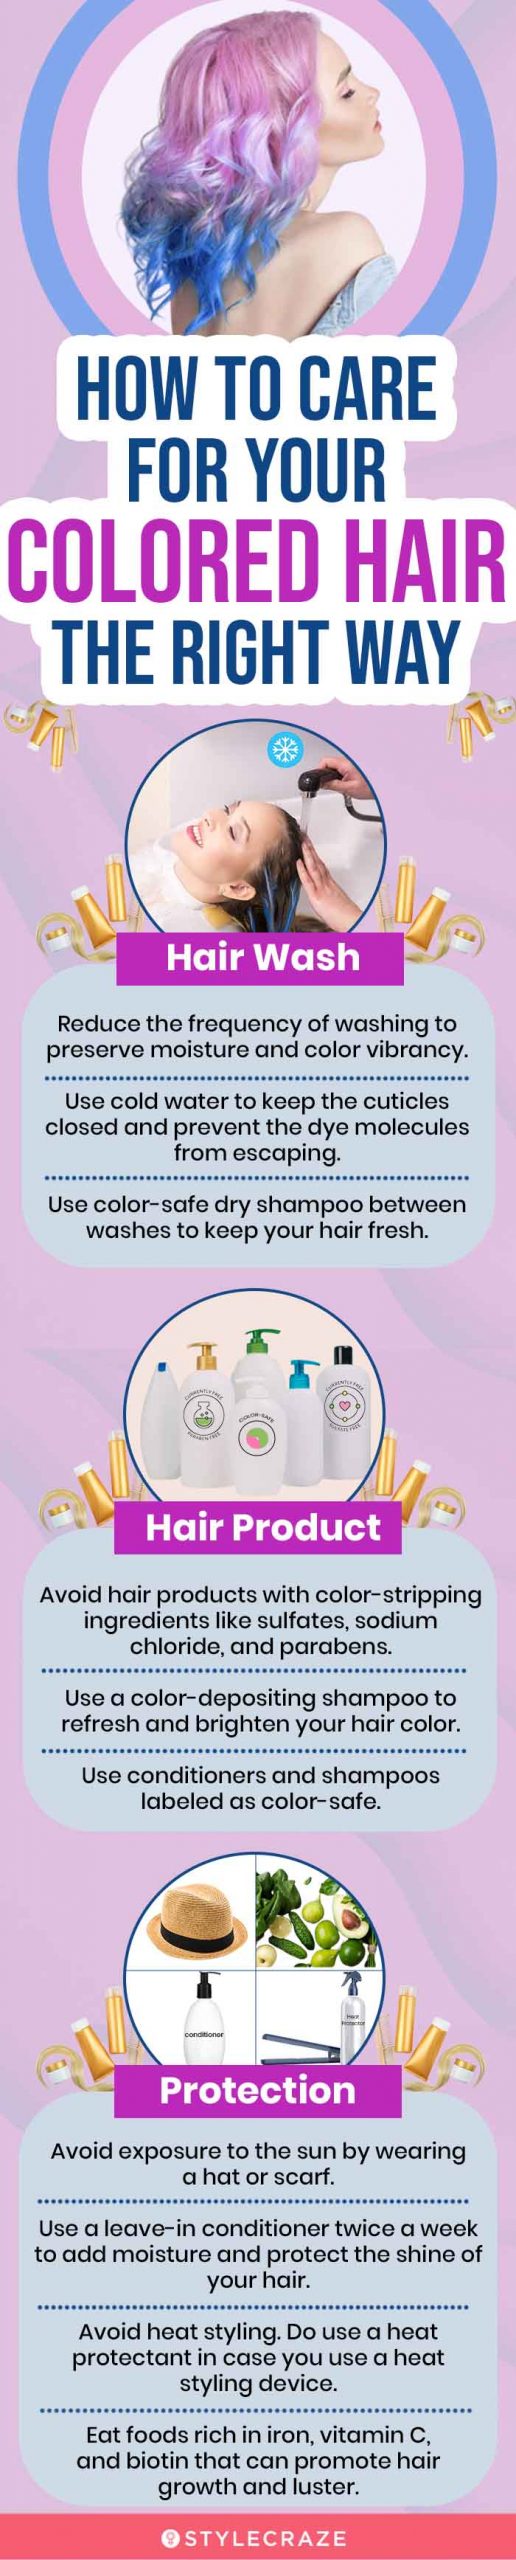 How To Care For Your Colored Hair The Right Way [infographic]